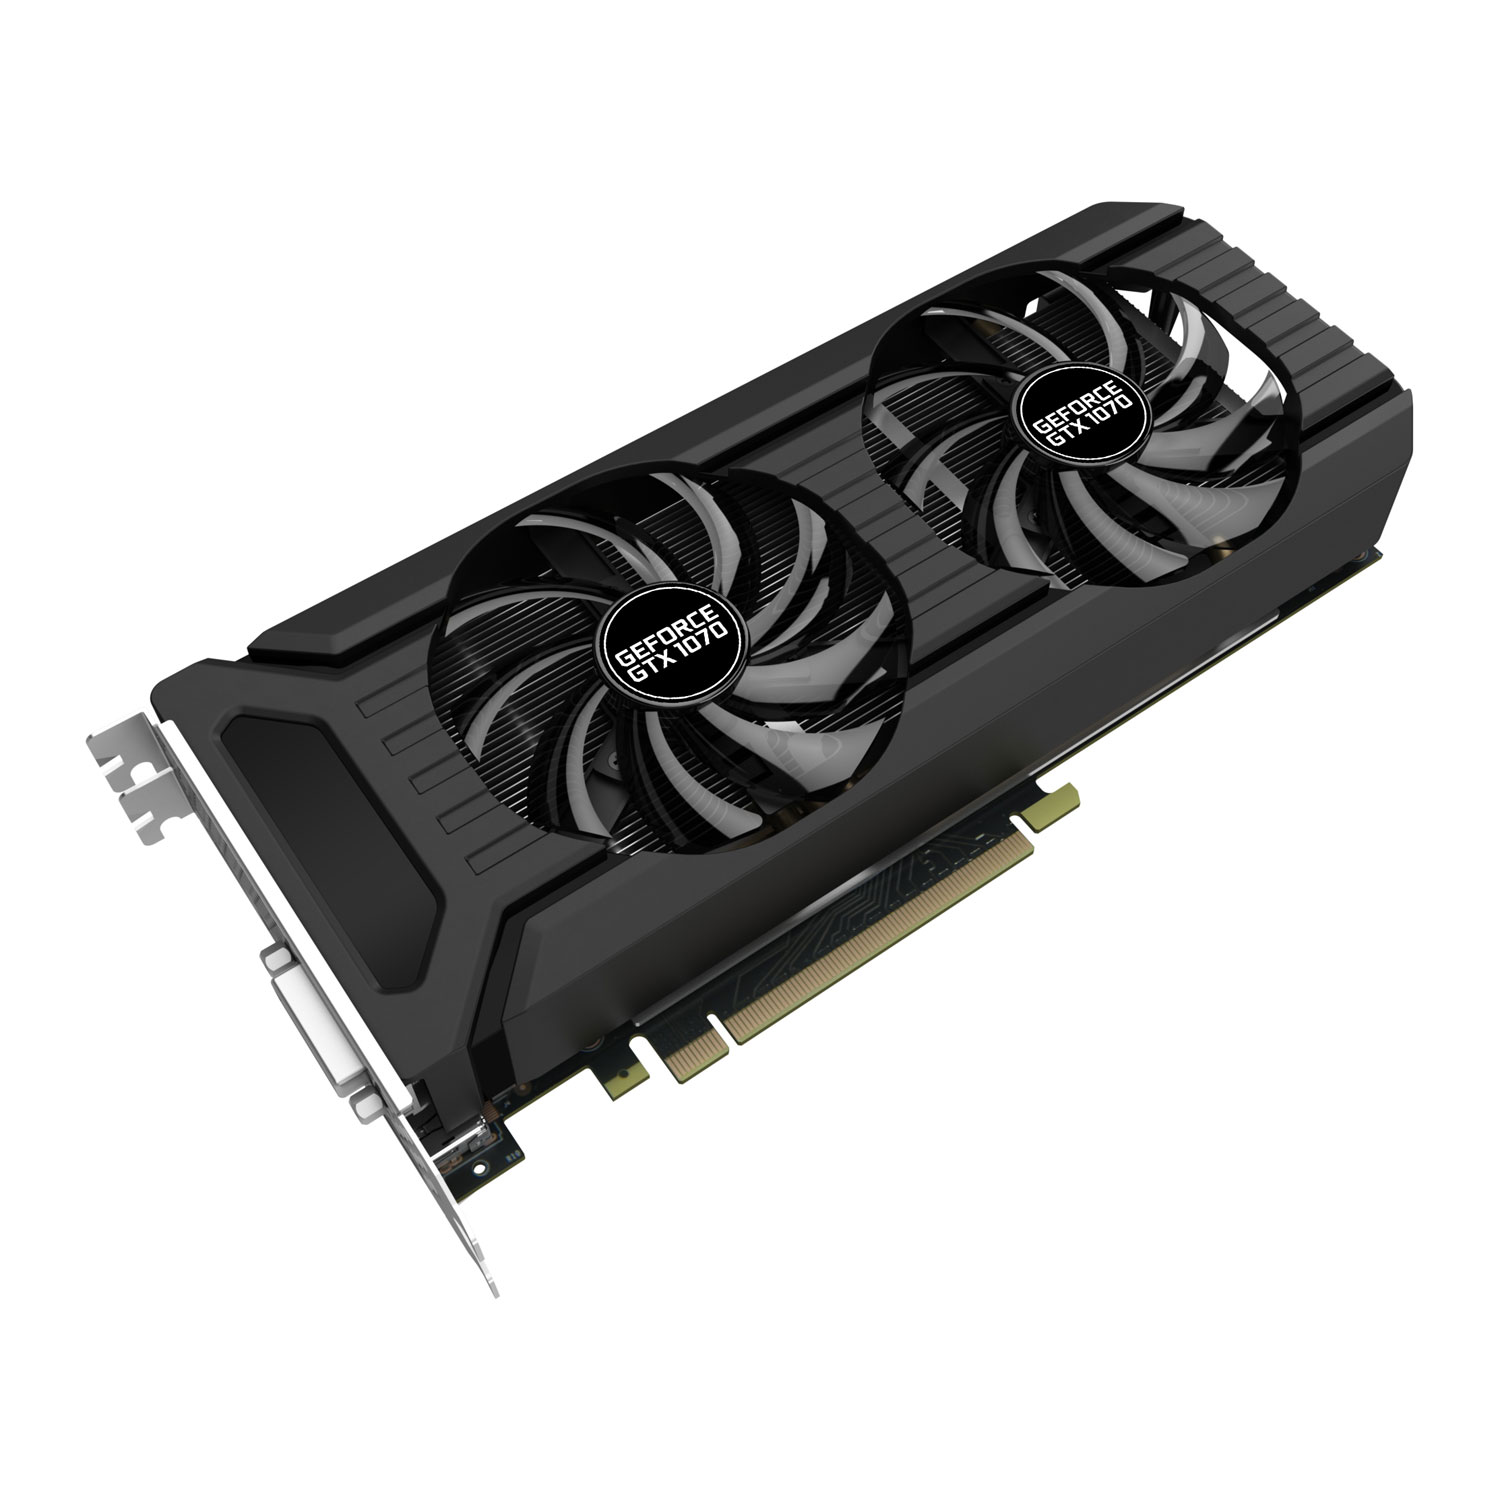 which graphics cards and drivers does opengl 4.3 support